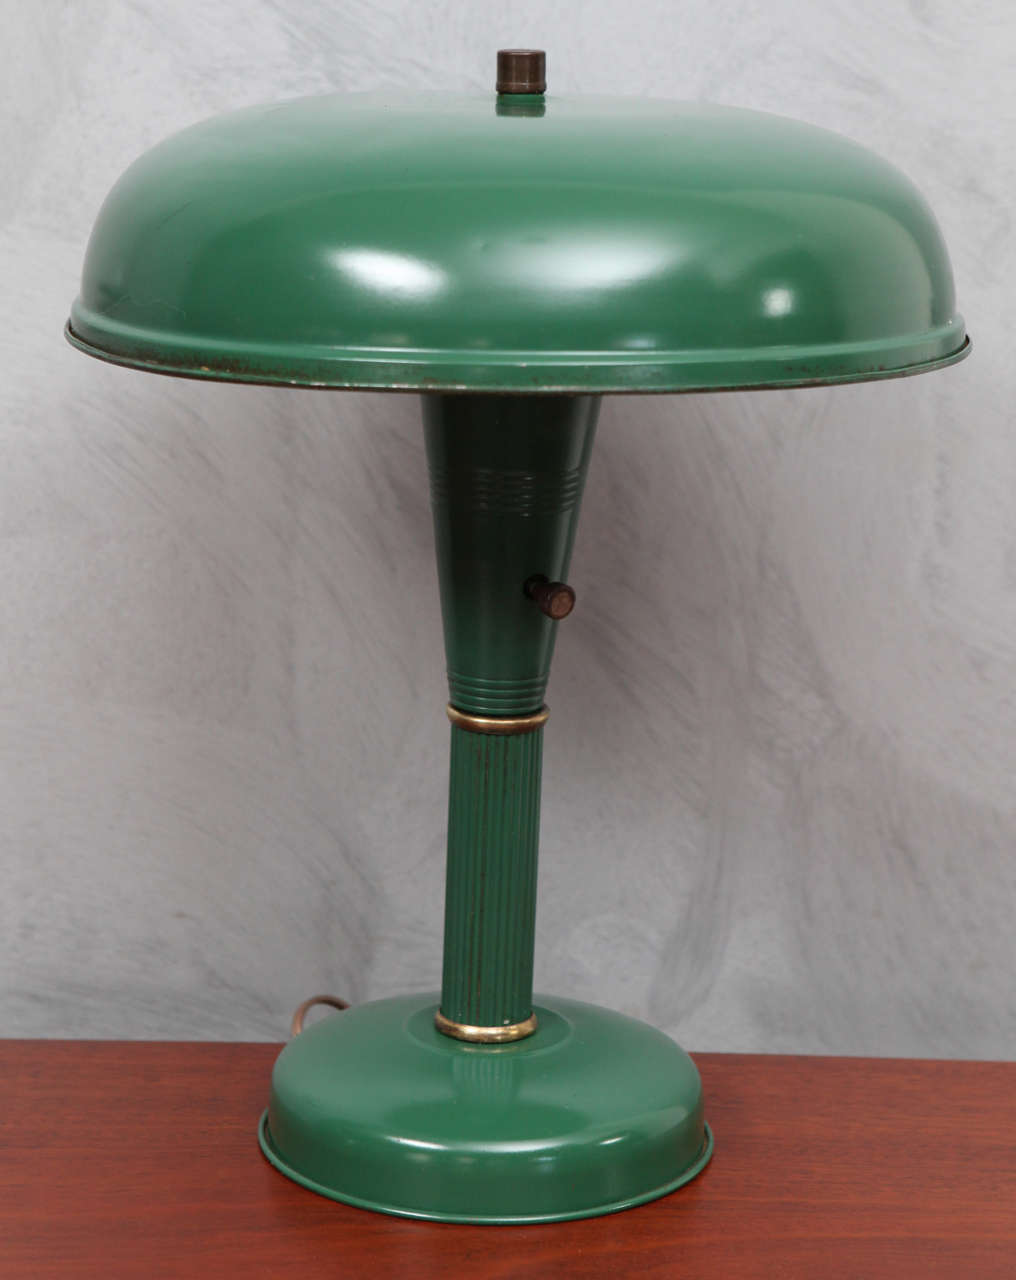 This is a wonderful Deco/Modern green painted desk lamp that reflects the design movements of the mid 1930's. The lamp's ridged center column with polished brass rings highlight the combination of modern or industrial elements with art deco charm.